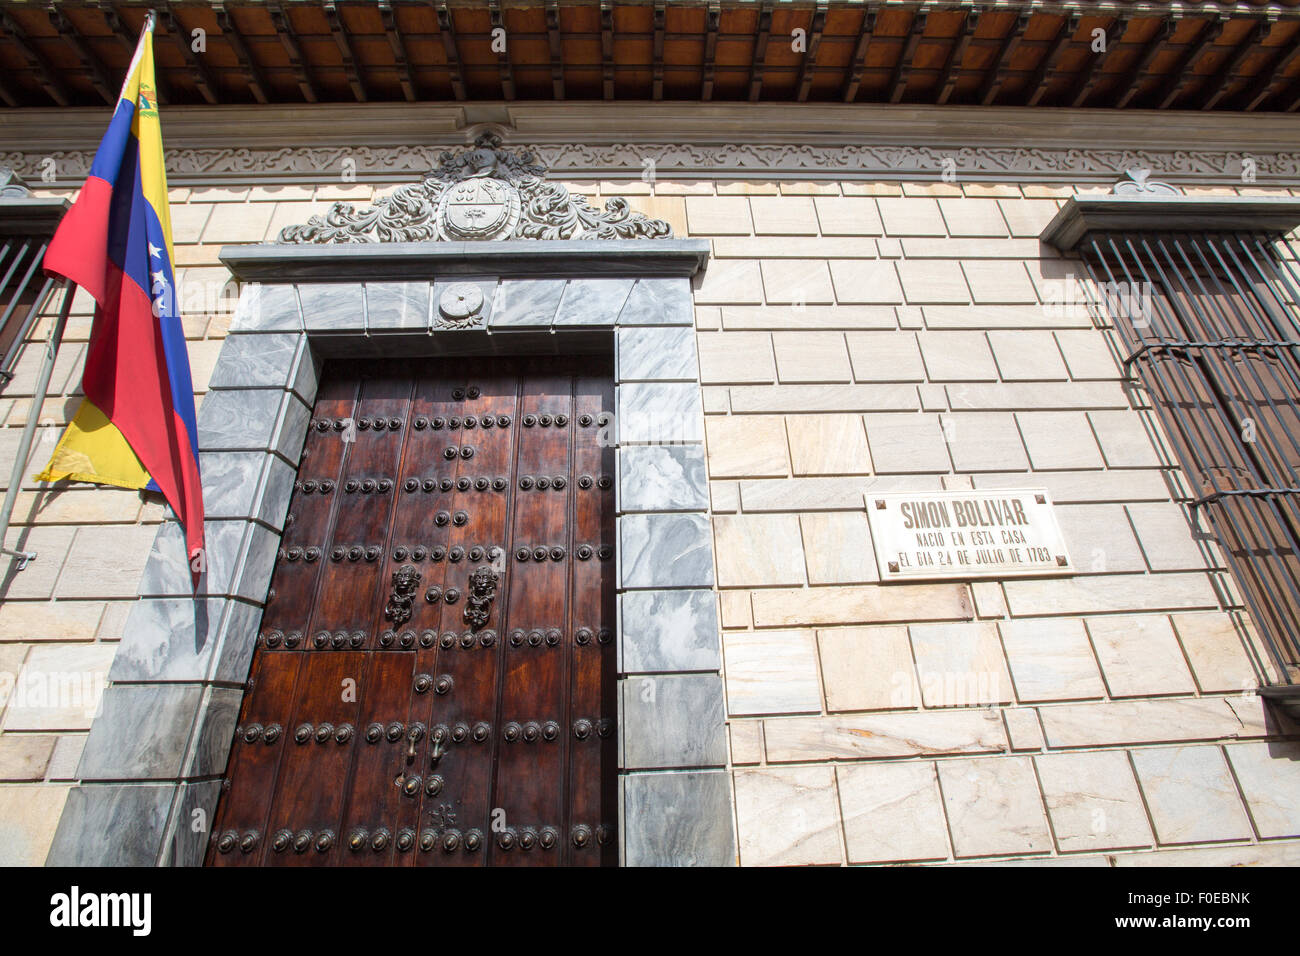 Simon Bolivar birthplace house. The museum's exhibits include period weapons, banners and uniforms. Stock Photo